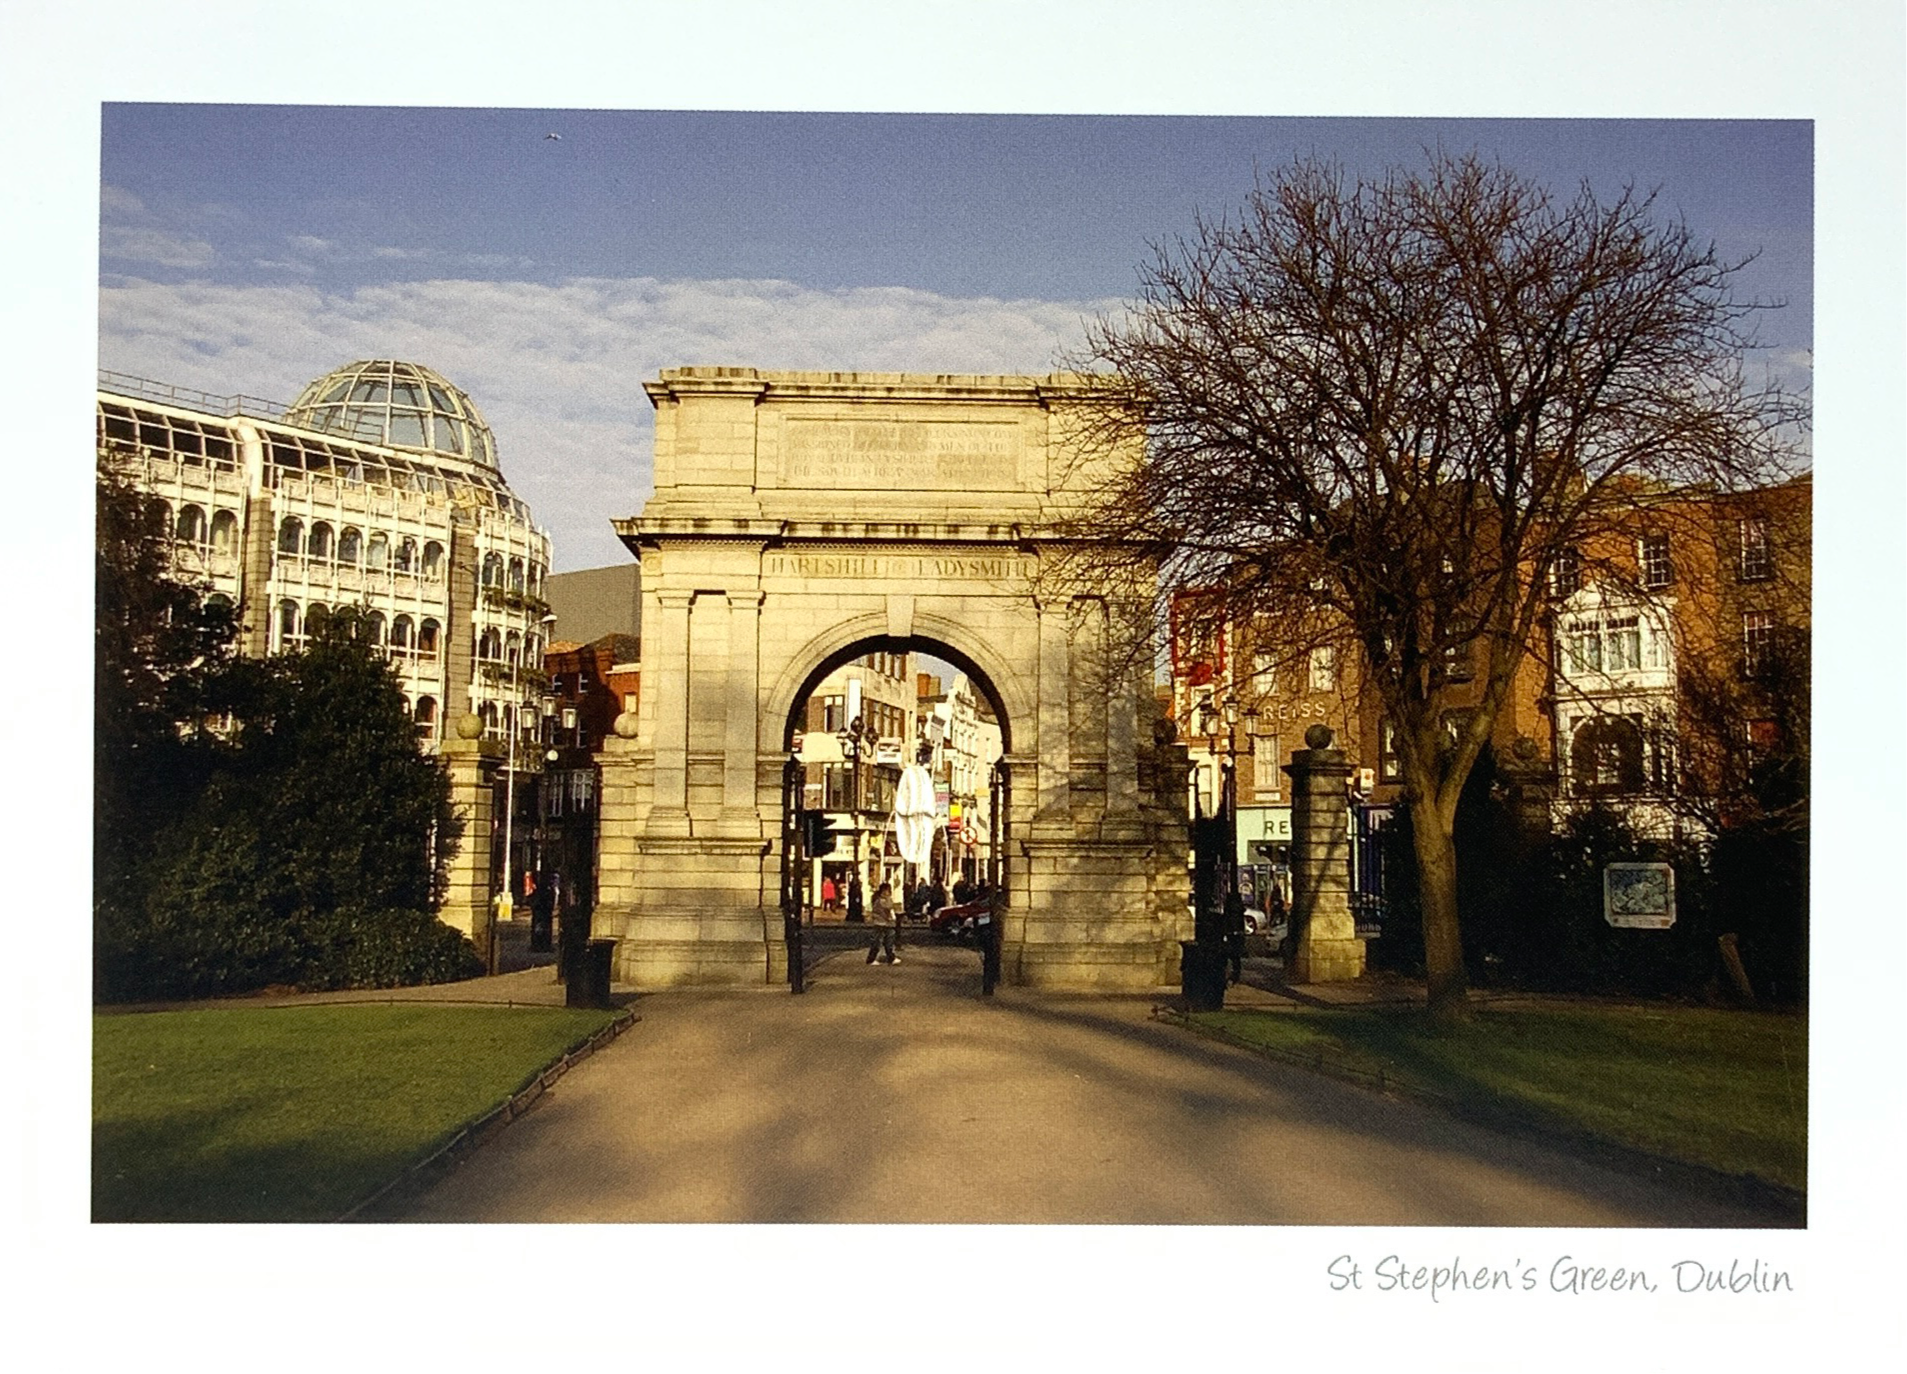 Catherine Dunne Card - Main Gate In St. Stephen’s Green Park